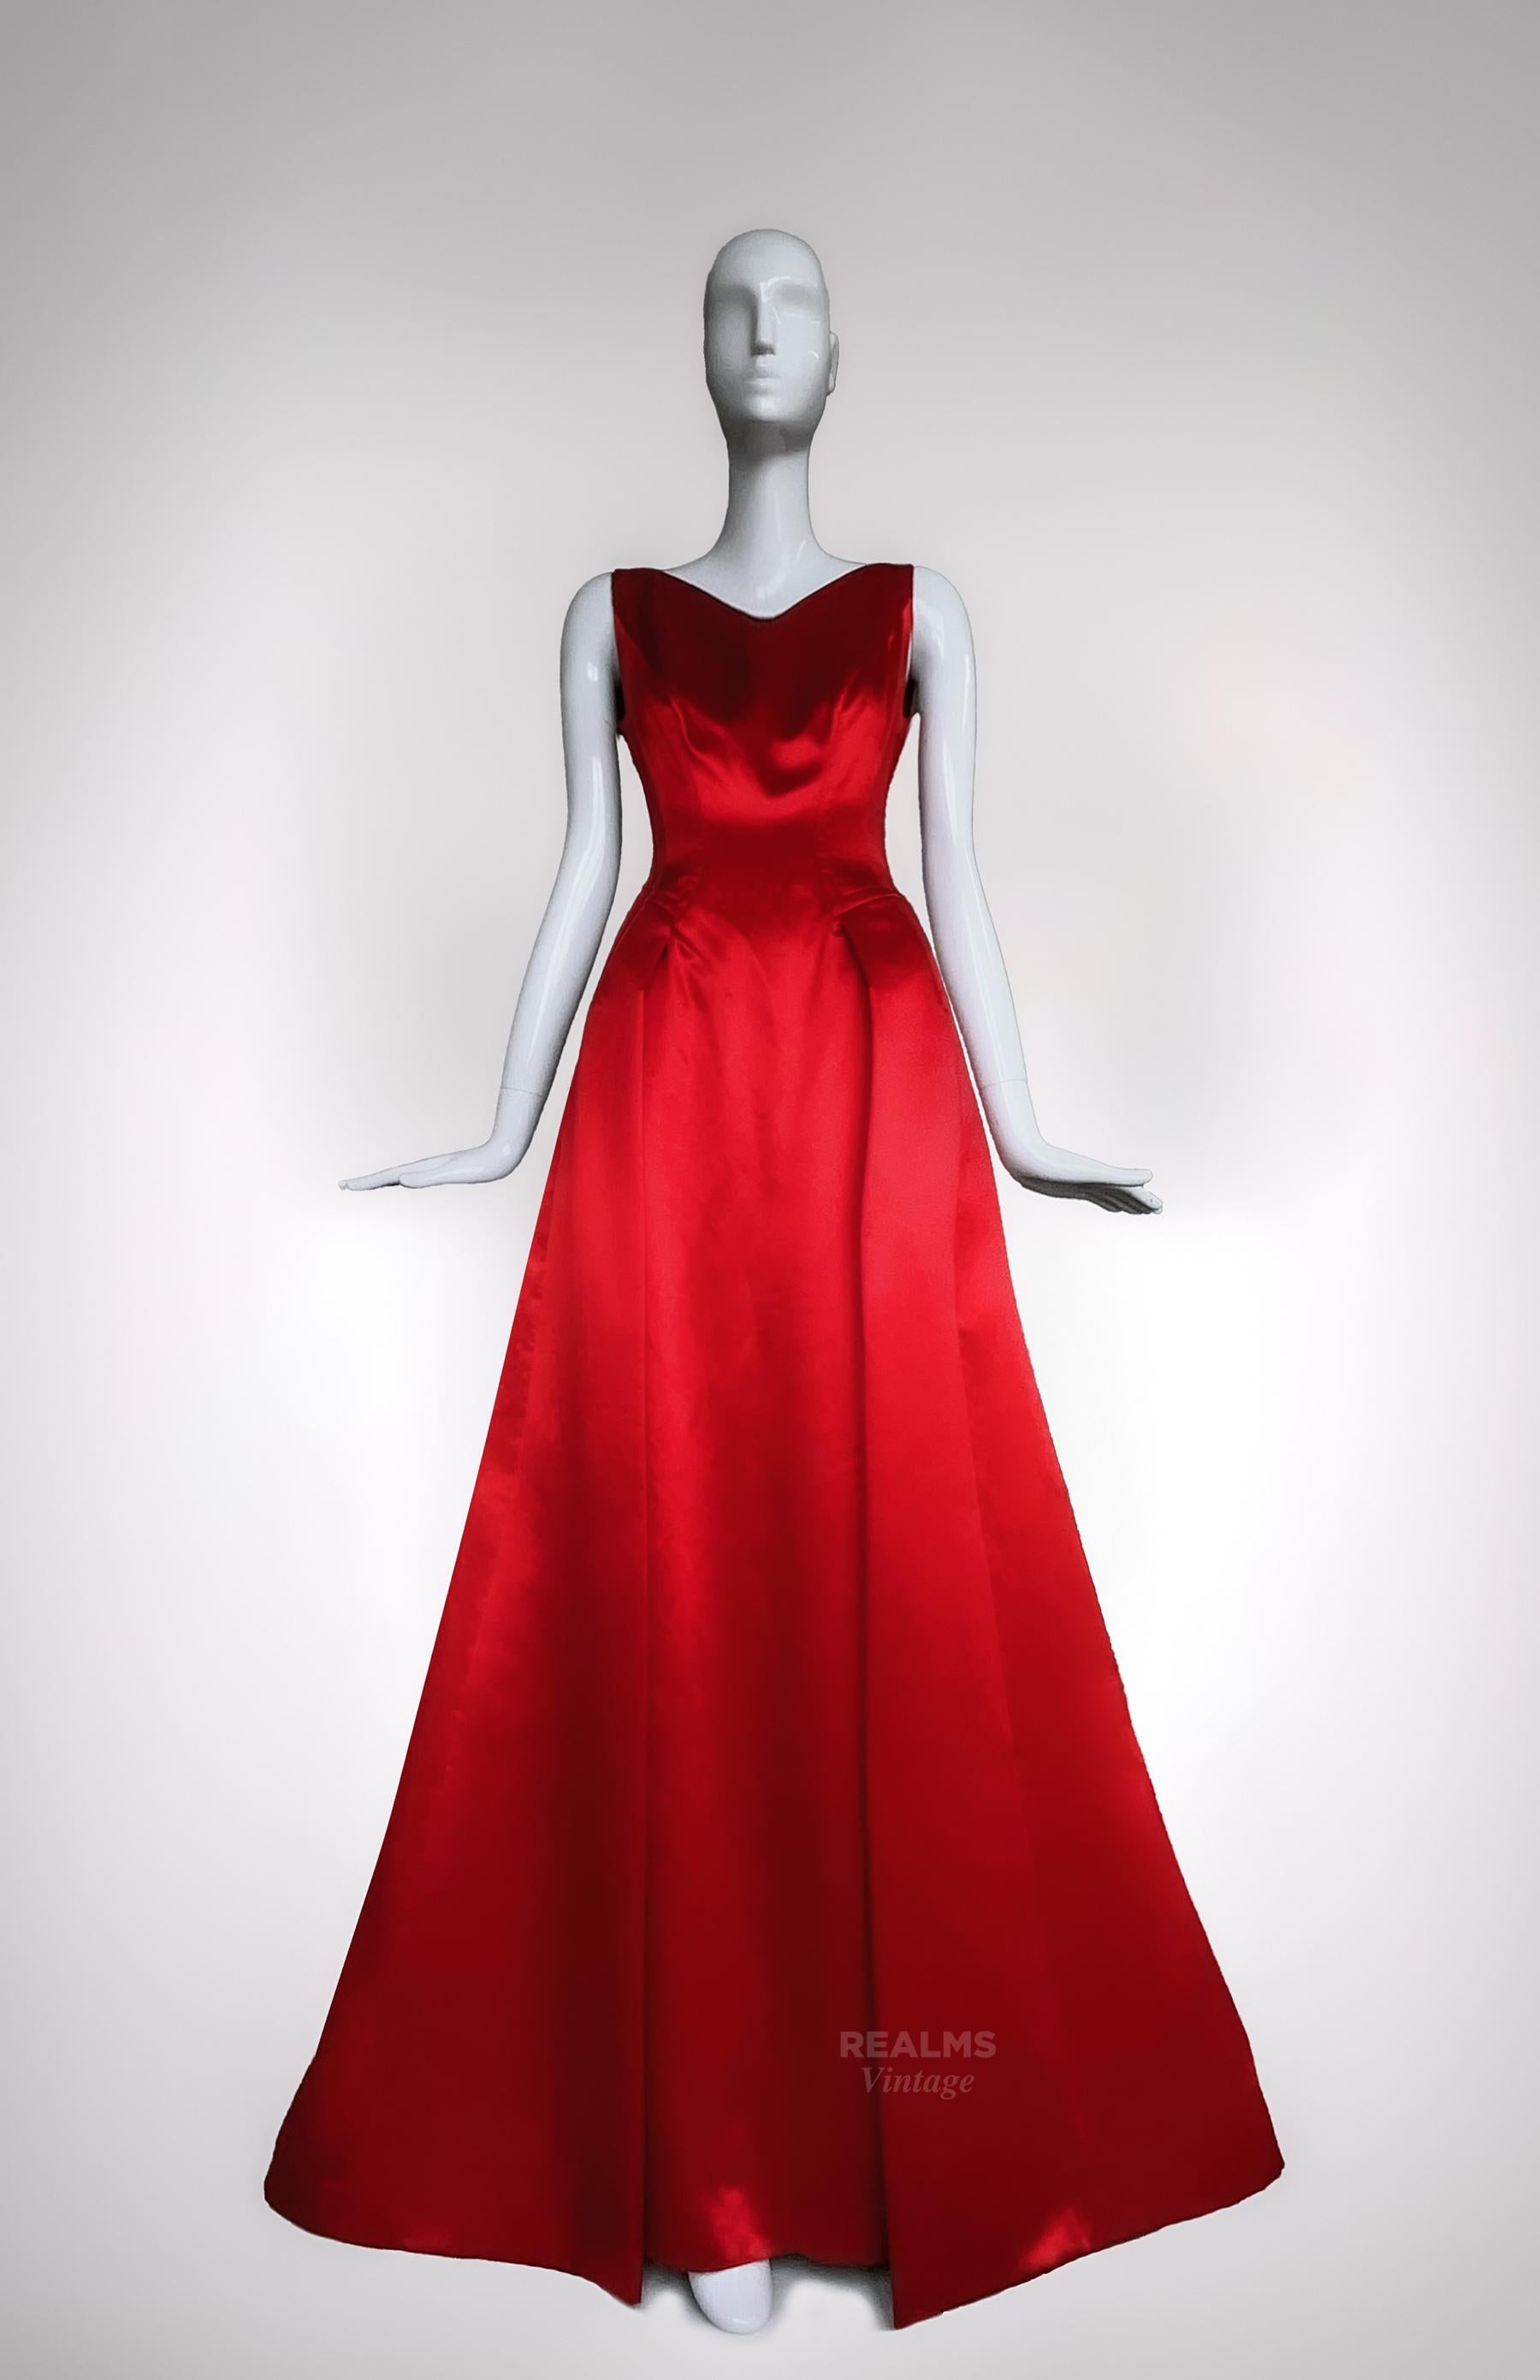  Thierry Mugler Couture FW1999 Goddess Silk Evening Gown Red Dress For Sale 9